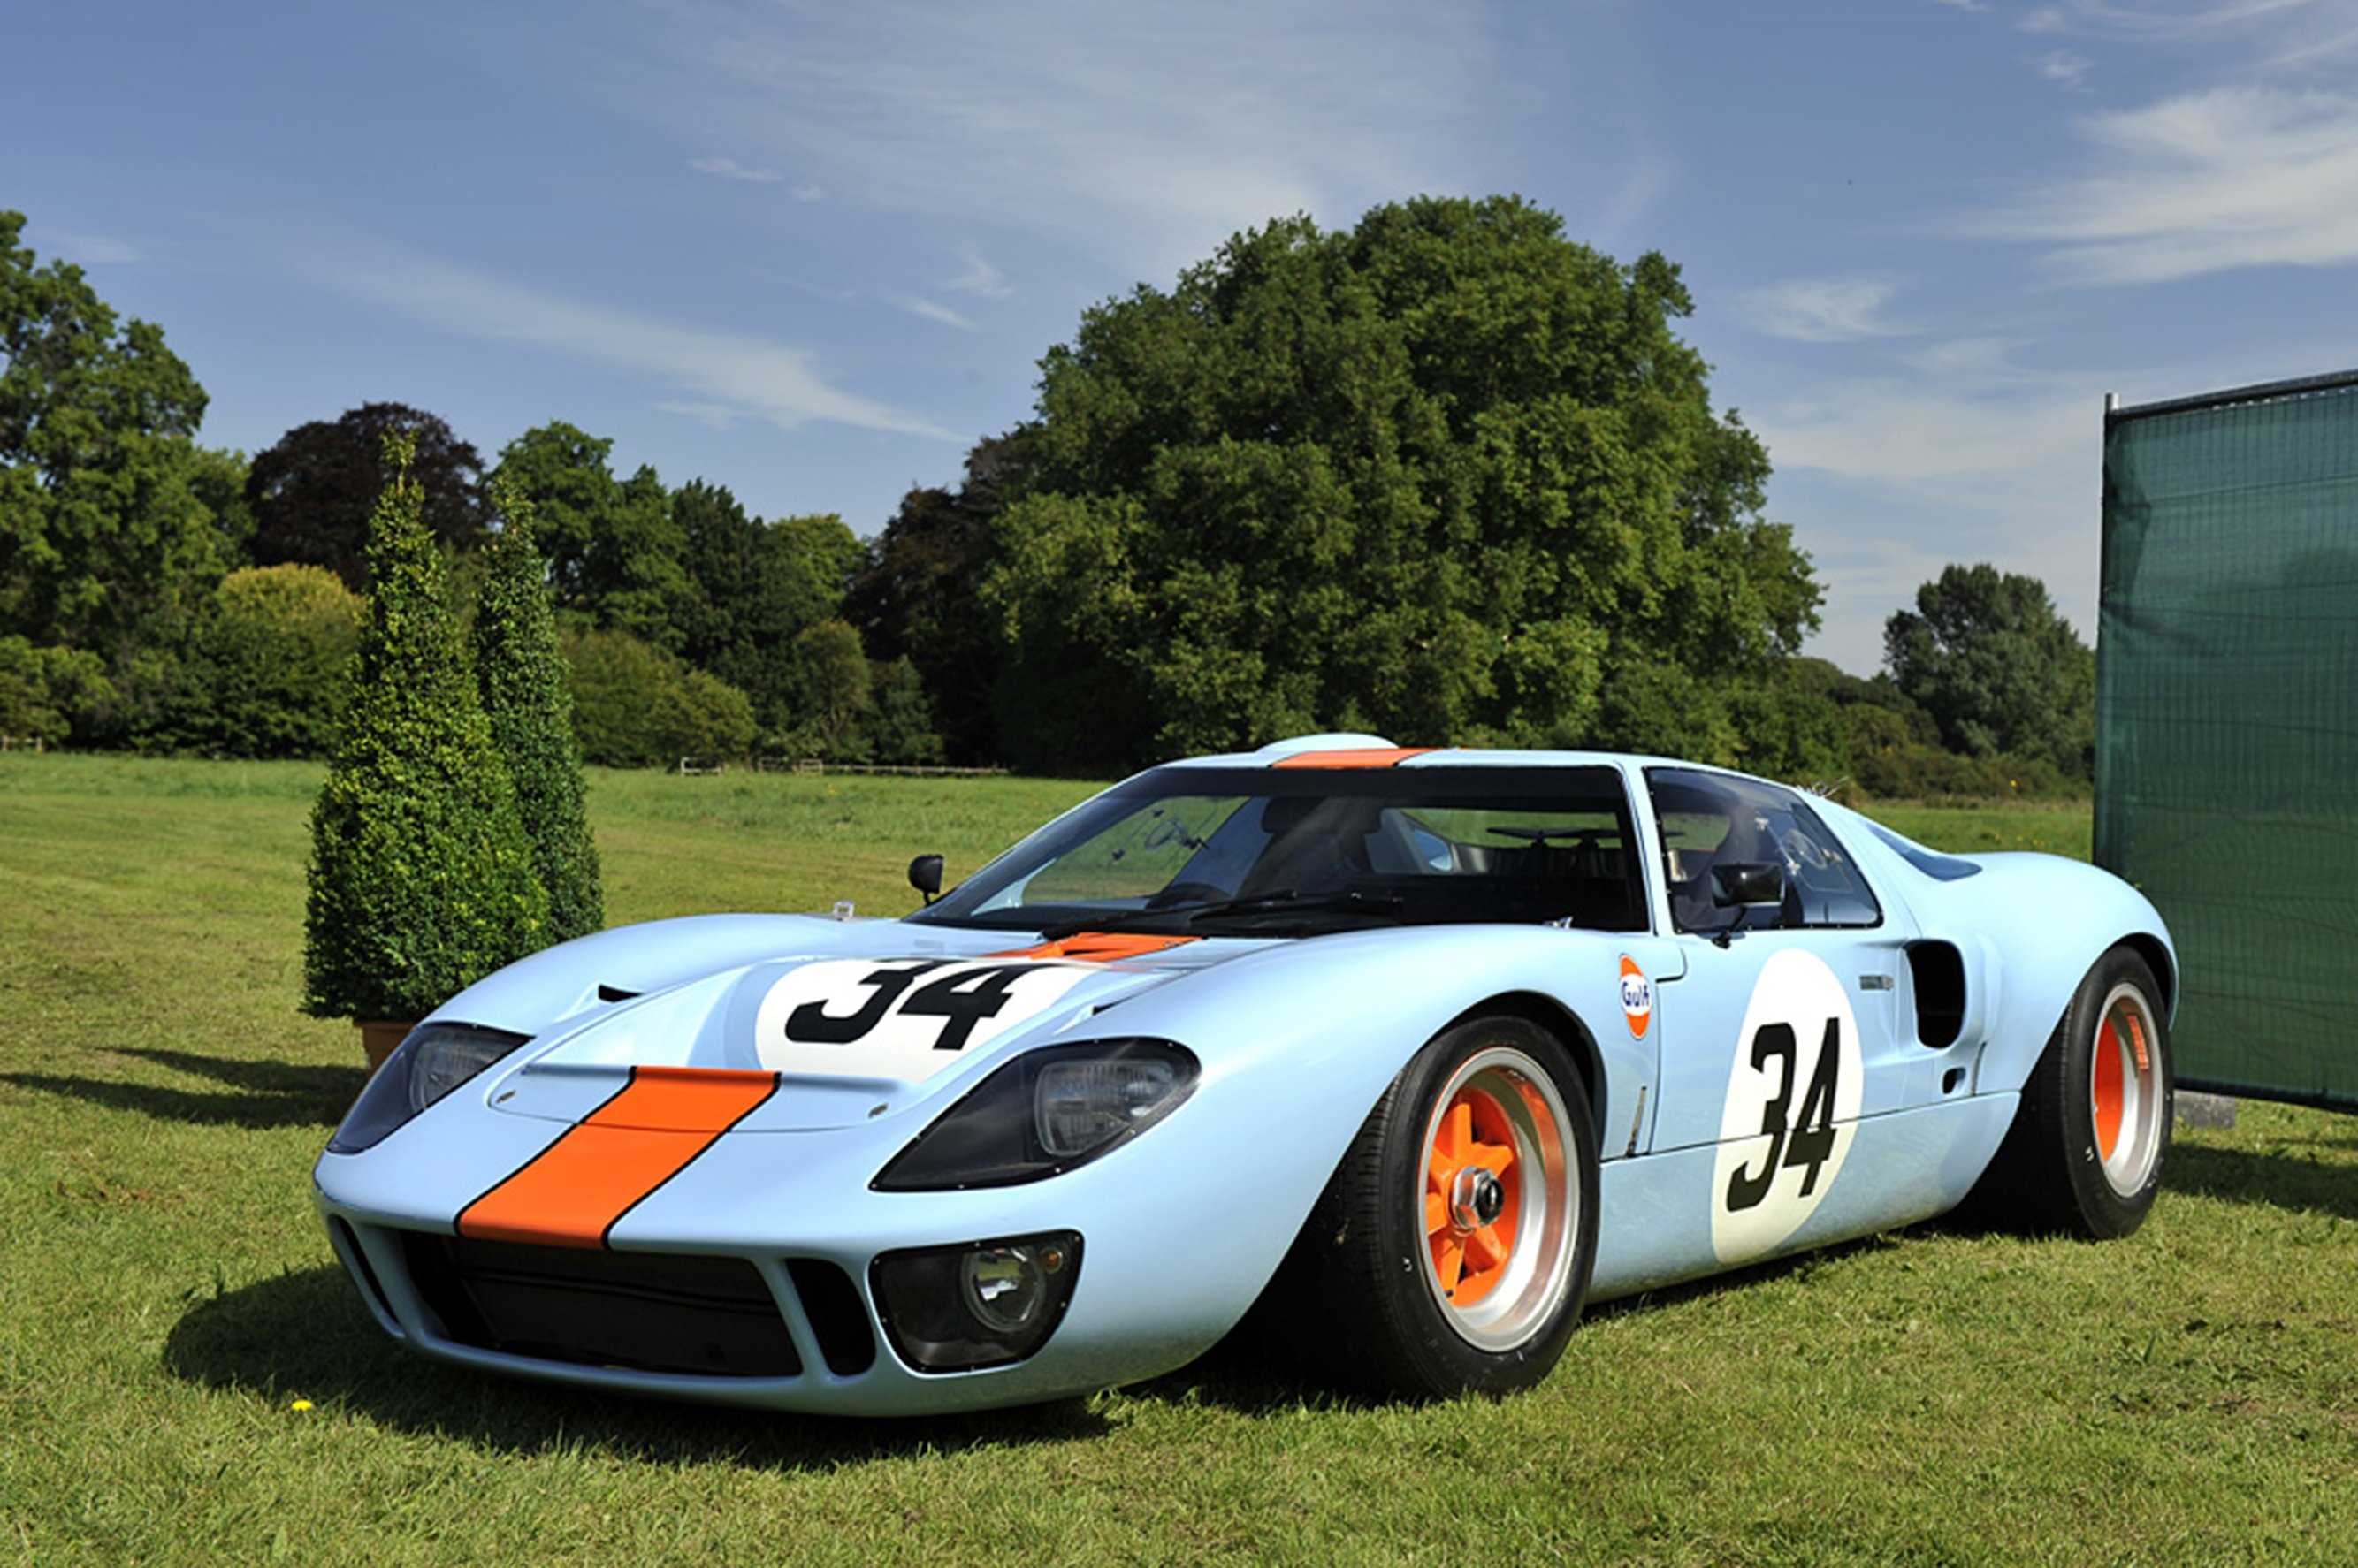 race, Car, Classic, Vehicle, Racing, Ford, Gt 40, Gulf, Le mans, Lmp1, 2667x1779 Wallpaper